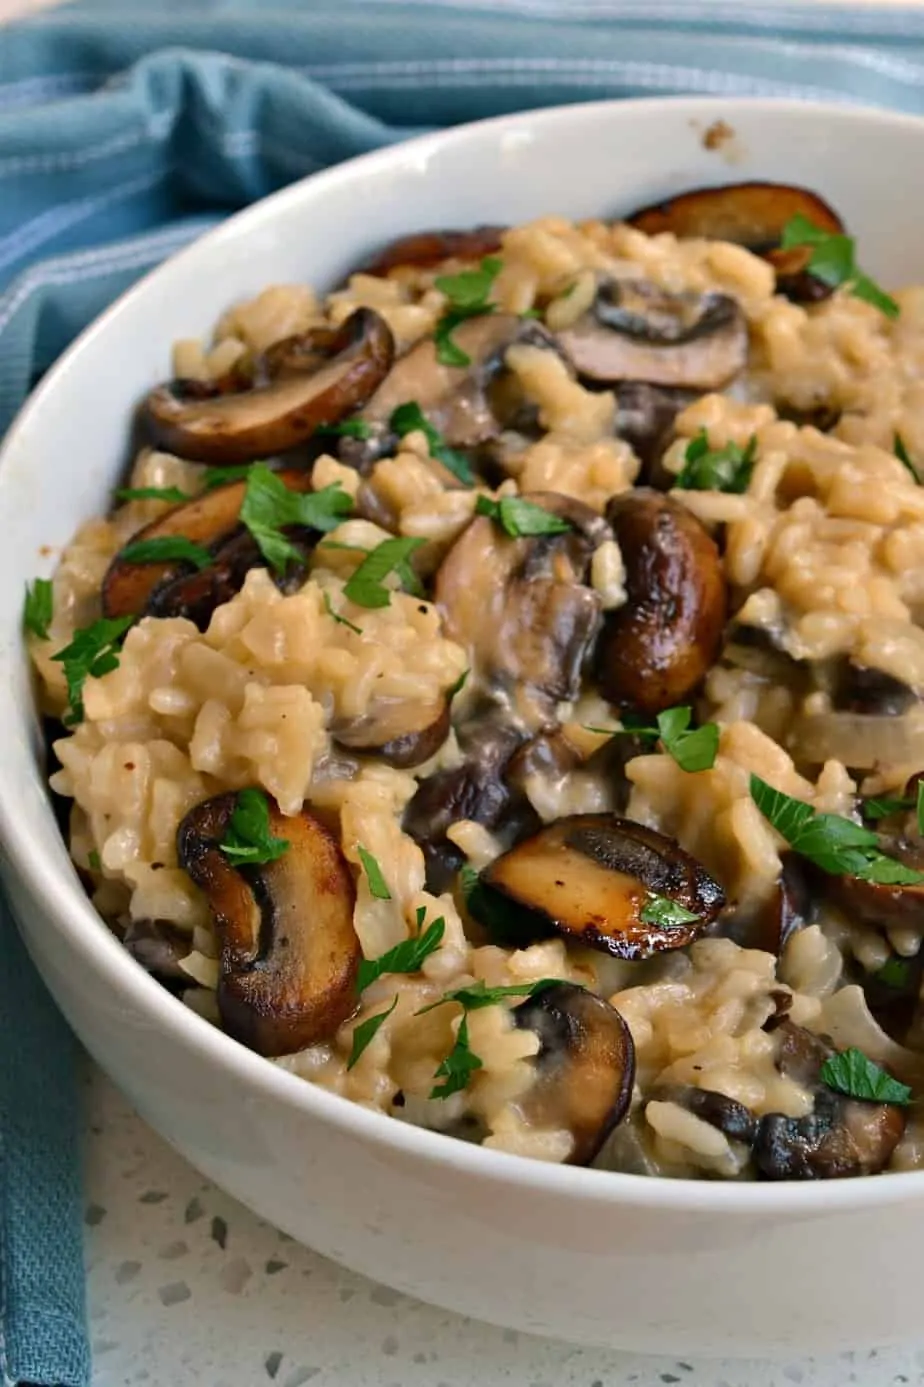 You are going to love the creaminess of this easy to make mushroom risotto.